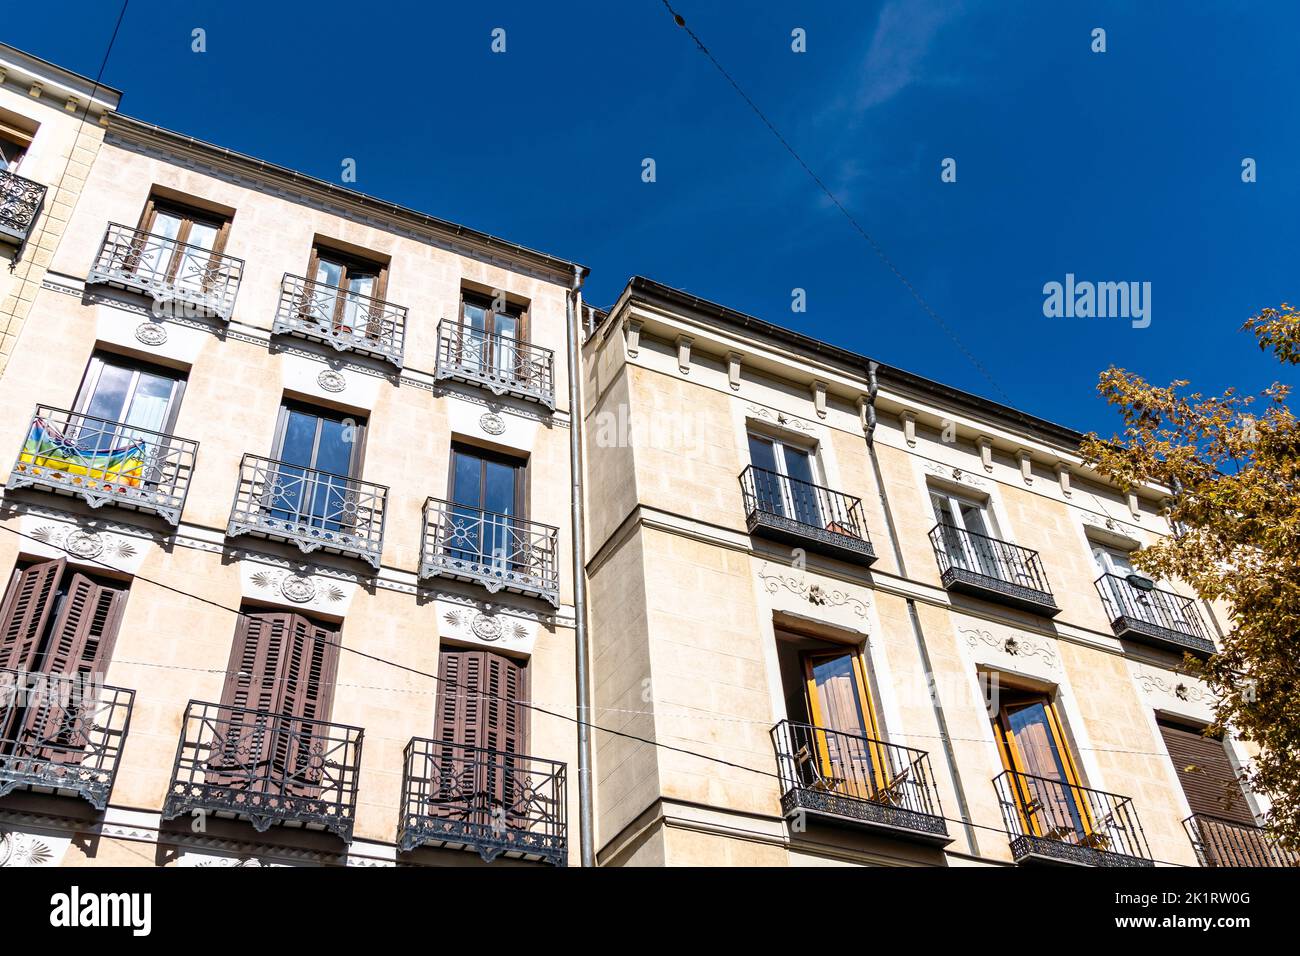 Low angle view of old residential building in the city against sky. University Quarter in central Madrid Stock Photo